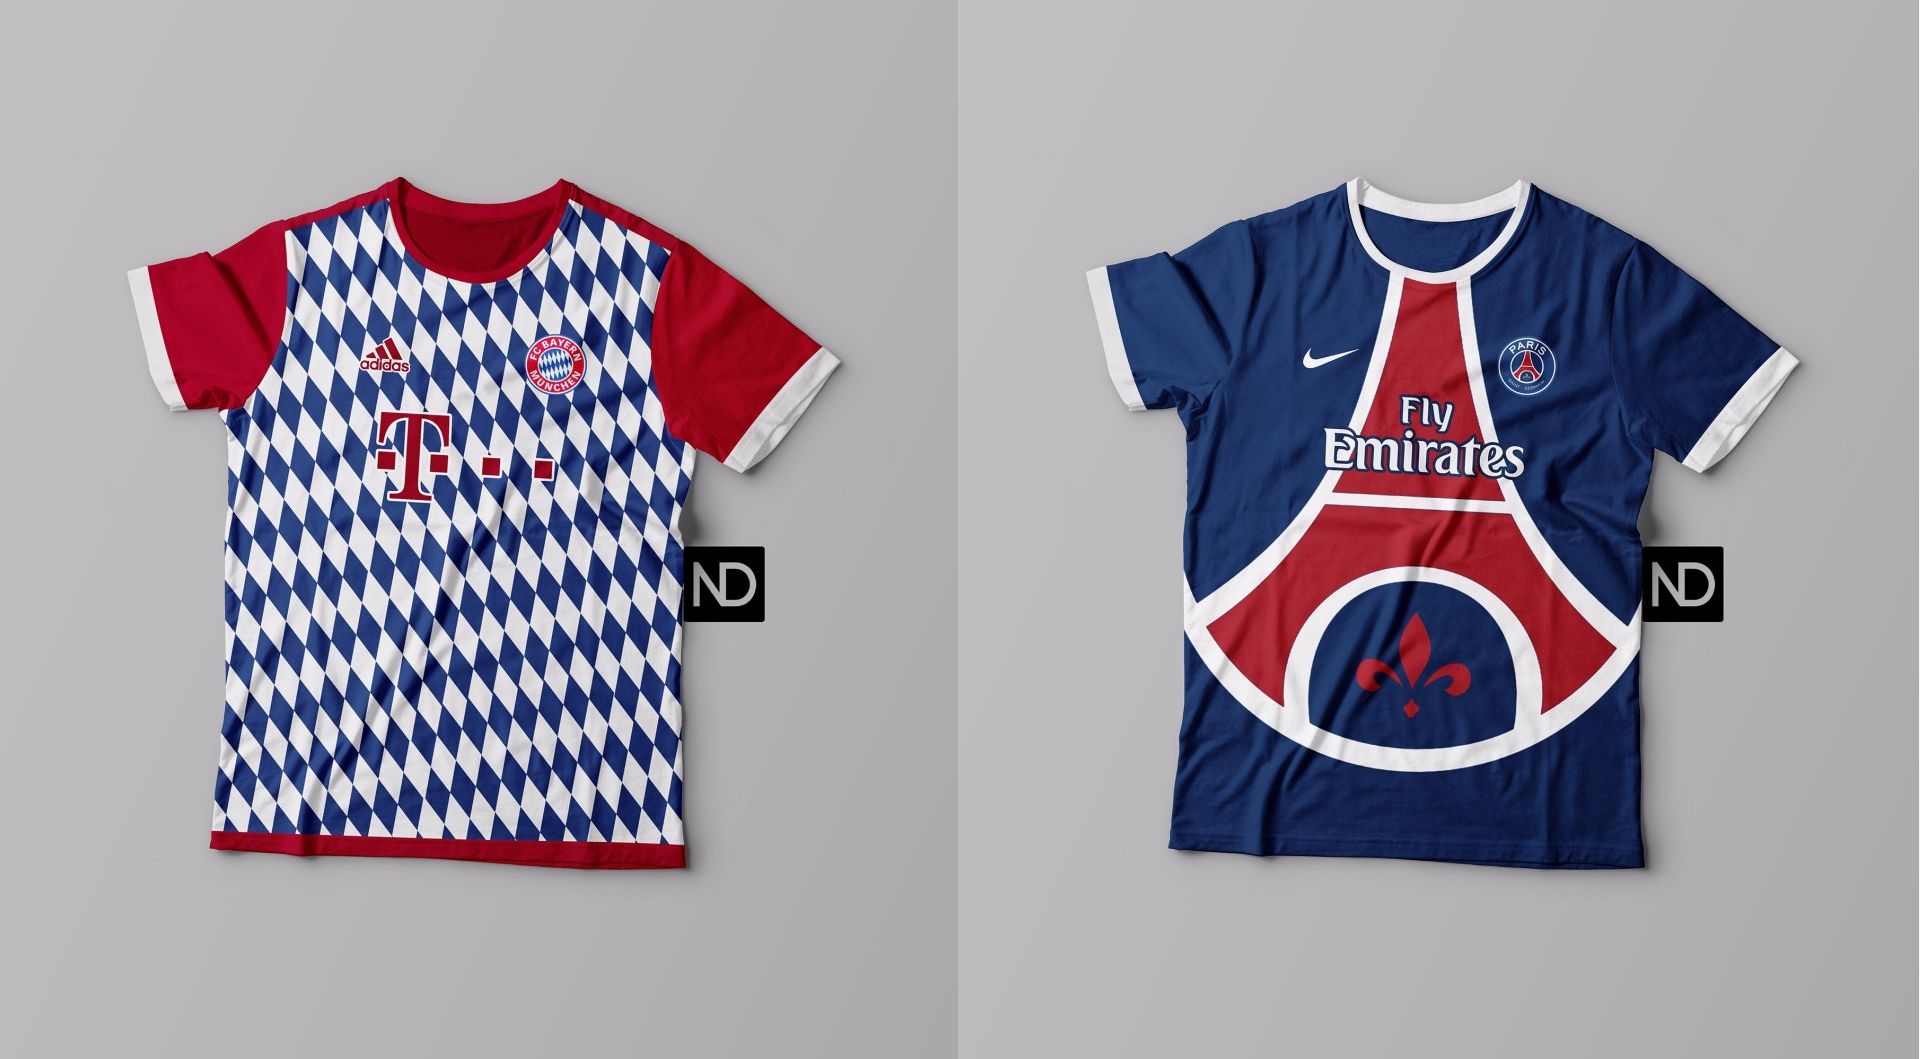 Are these crest-based concept football kits better than the real